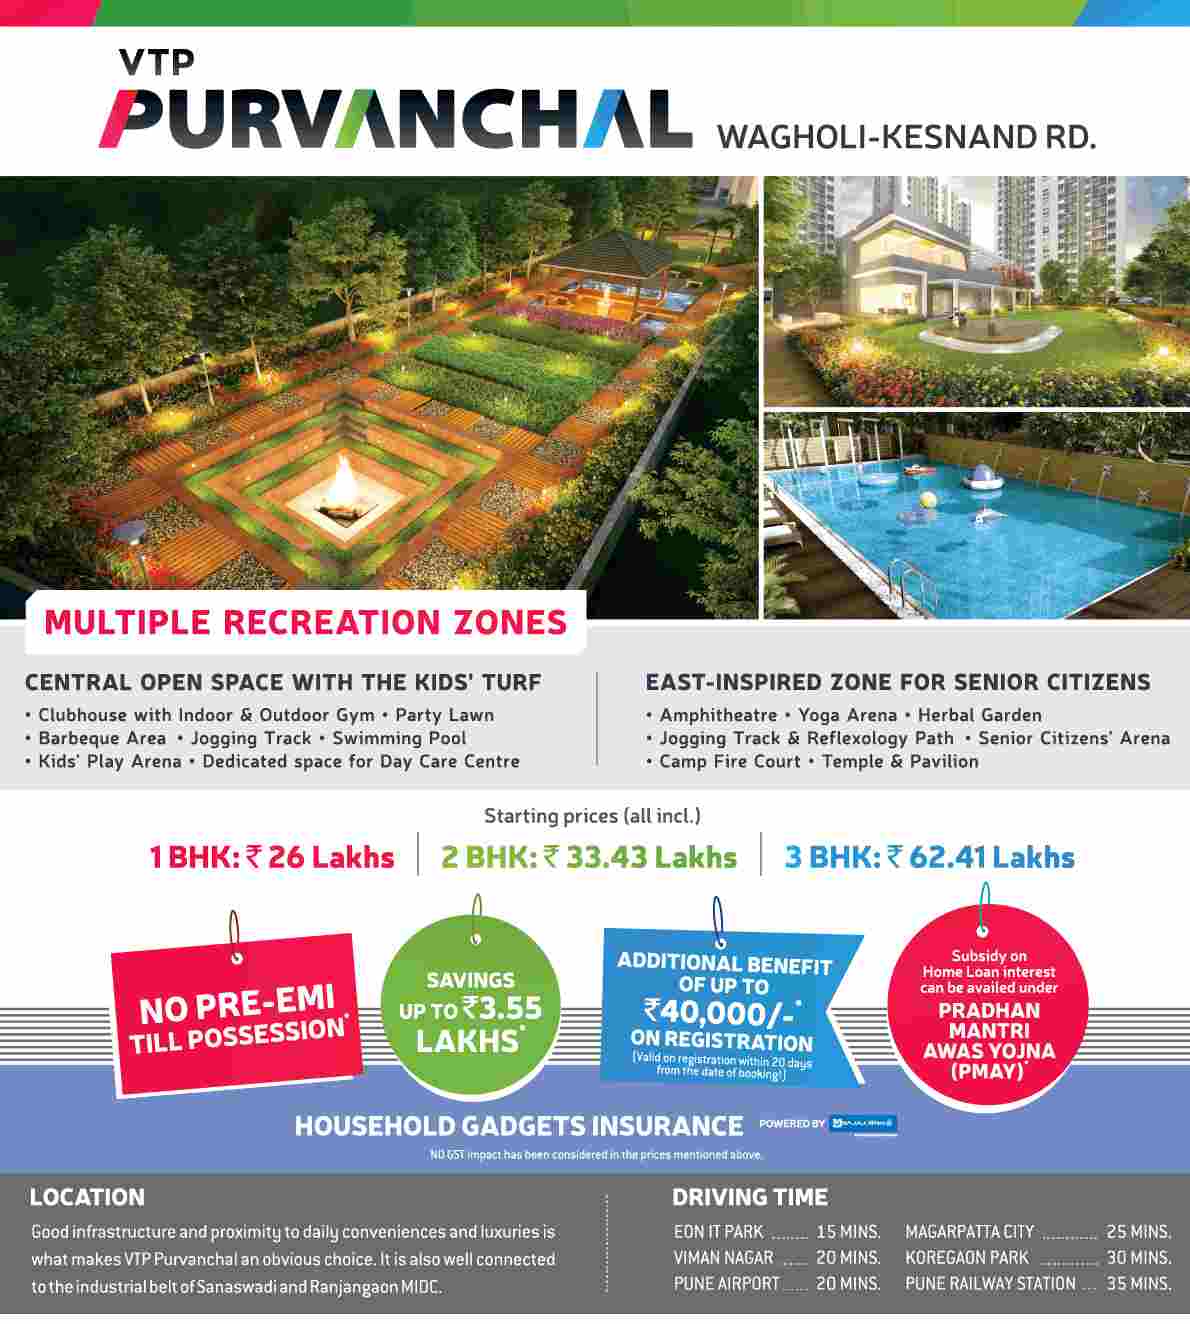 Experience good infrastructure & proximity to daily conveniences & luxuries by residing at VTP Purvanchal in Pune Update